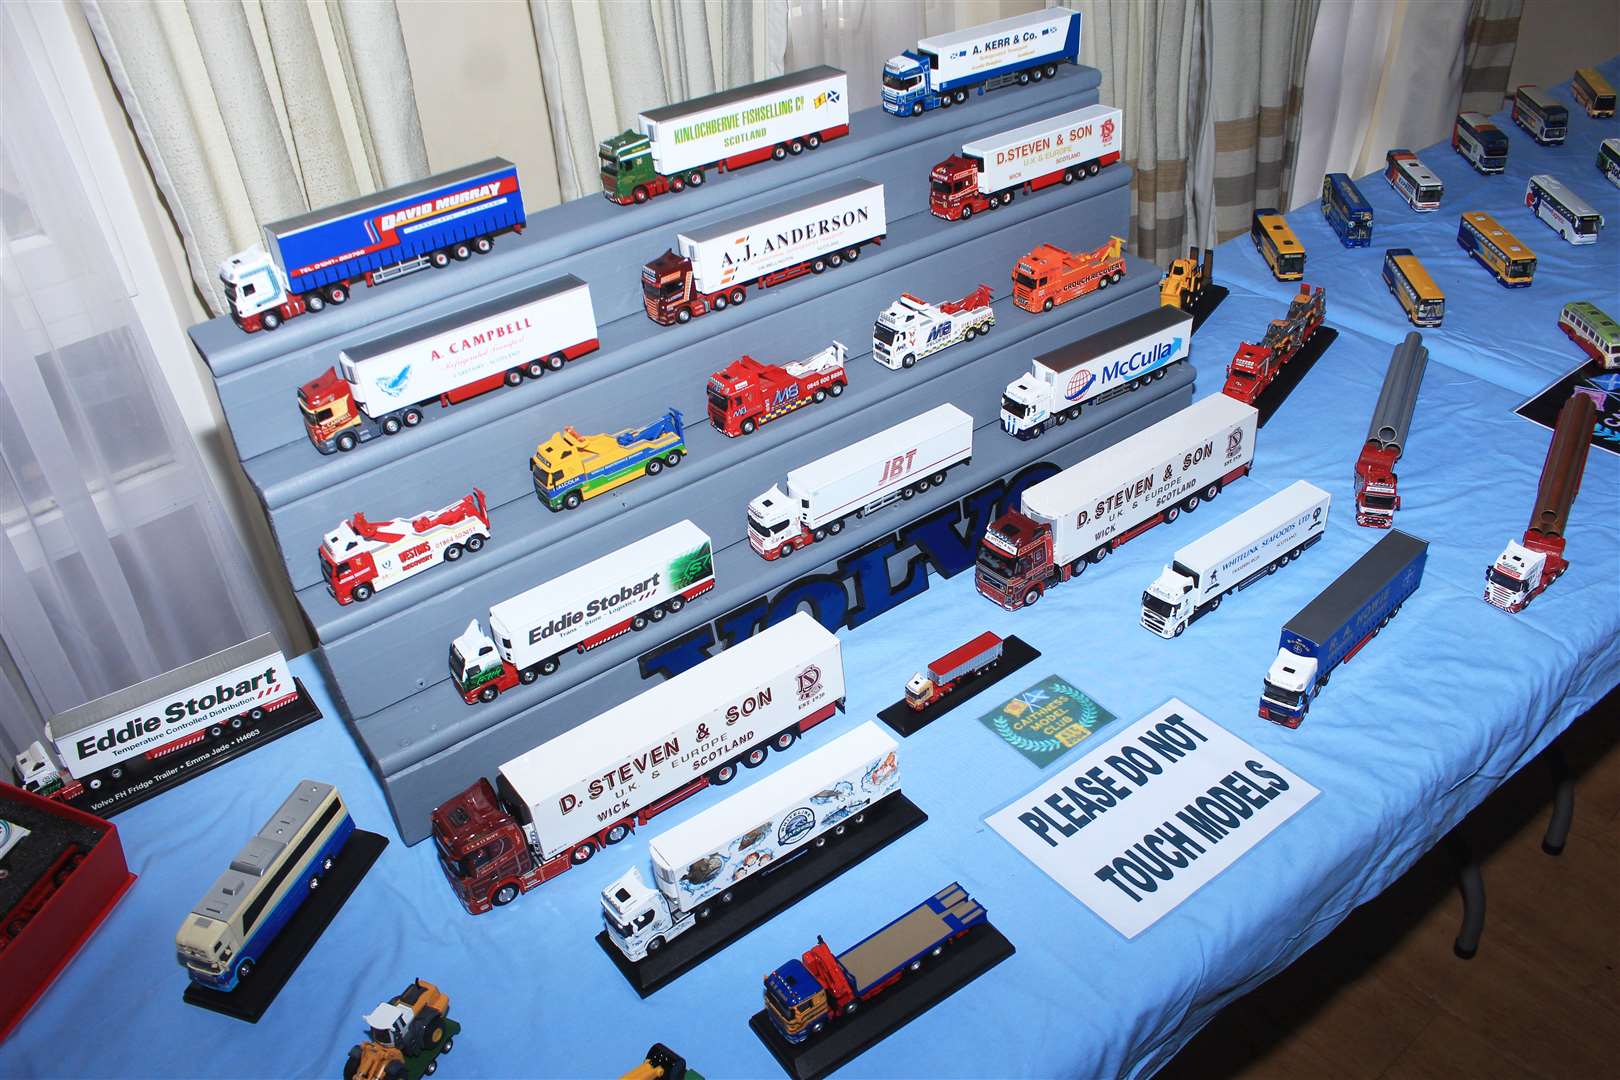 Model lorries on display at the show in the Norseman Hotel.